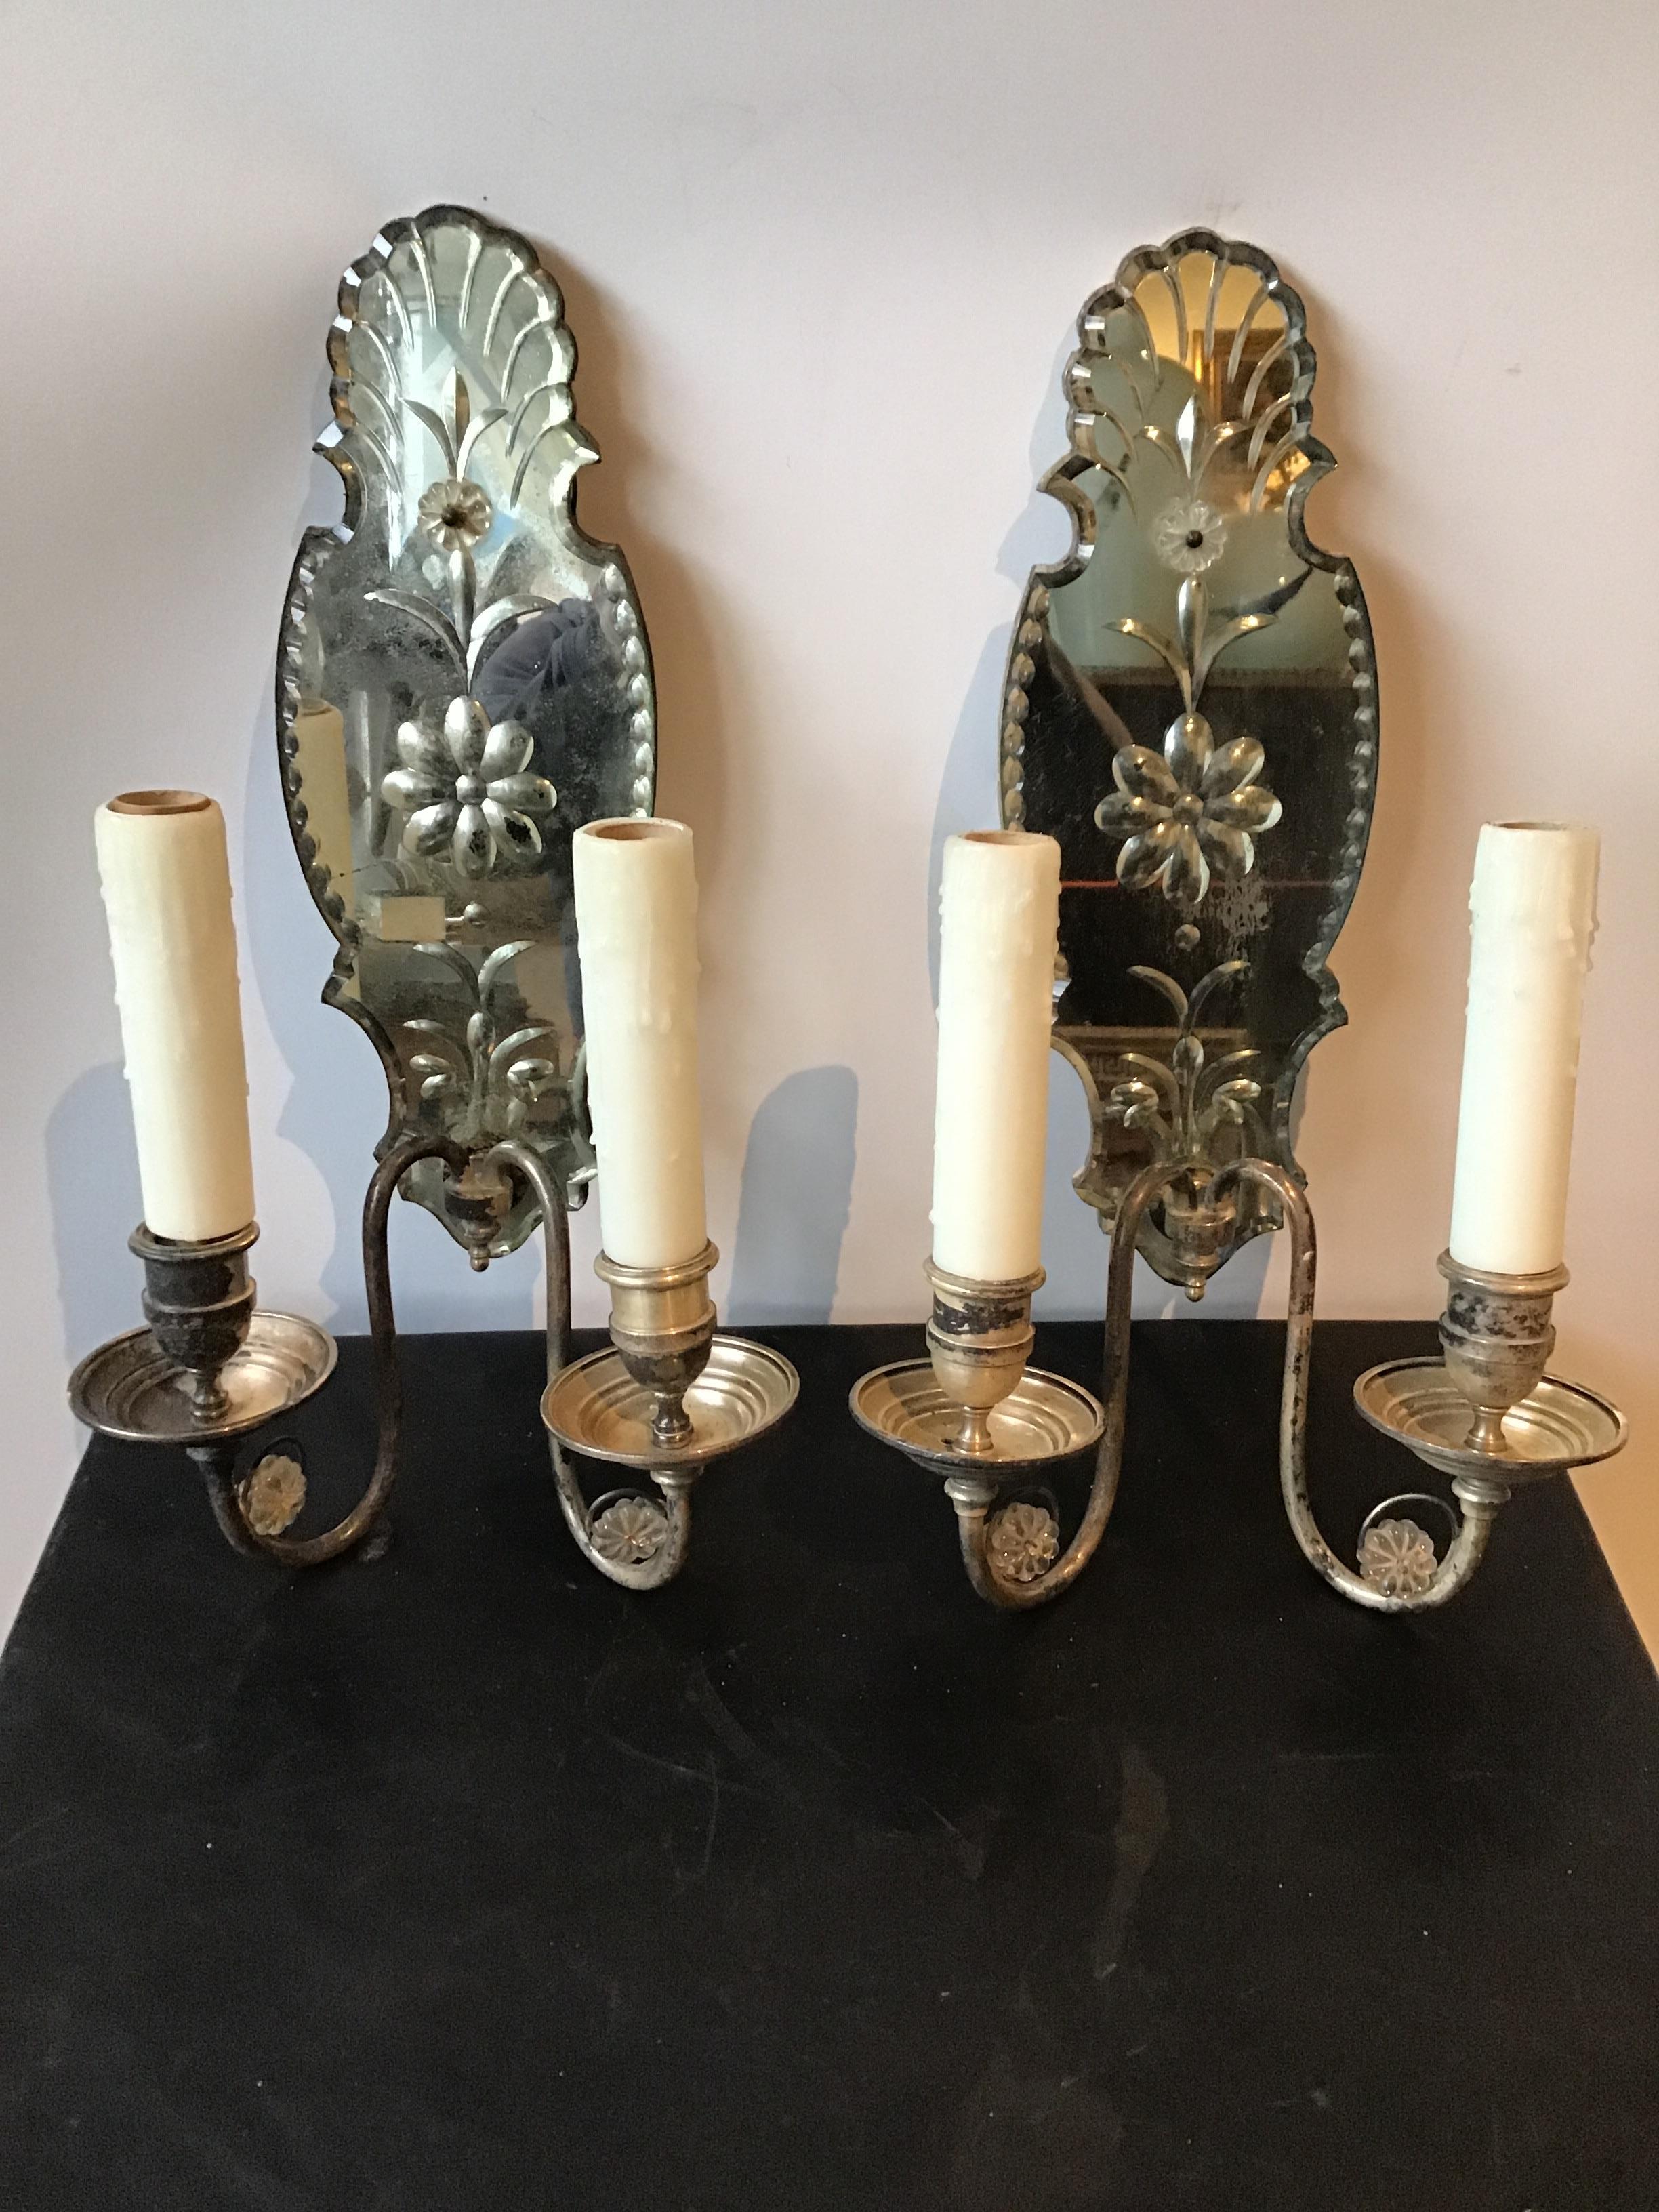 Large 1920s mirrored sconces with silver plate arms. Silver plate is distressed in areas. Purchased from a Greenwich, Connecticut mansion.